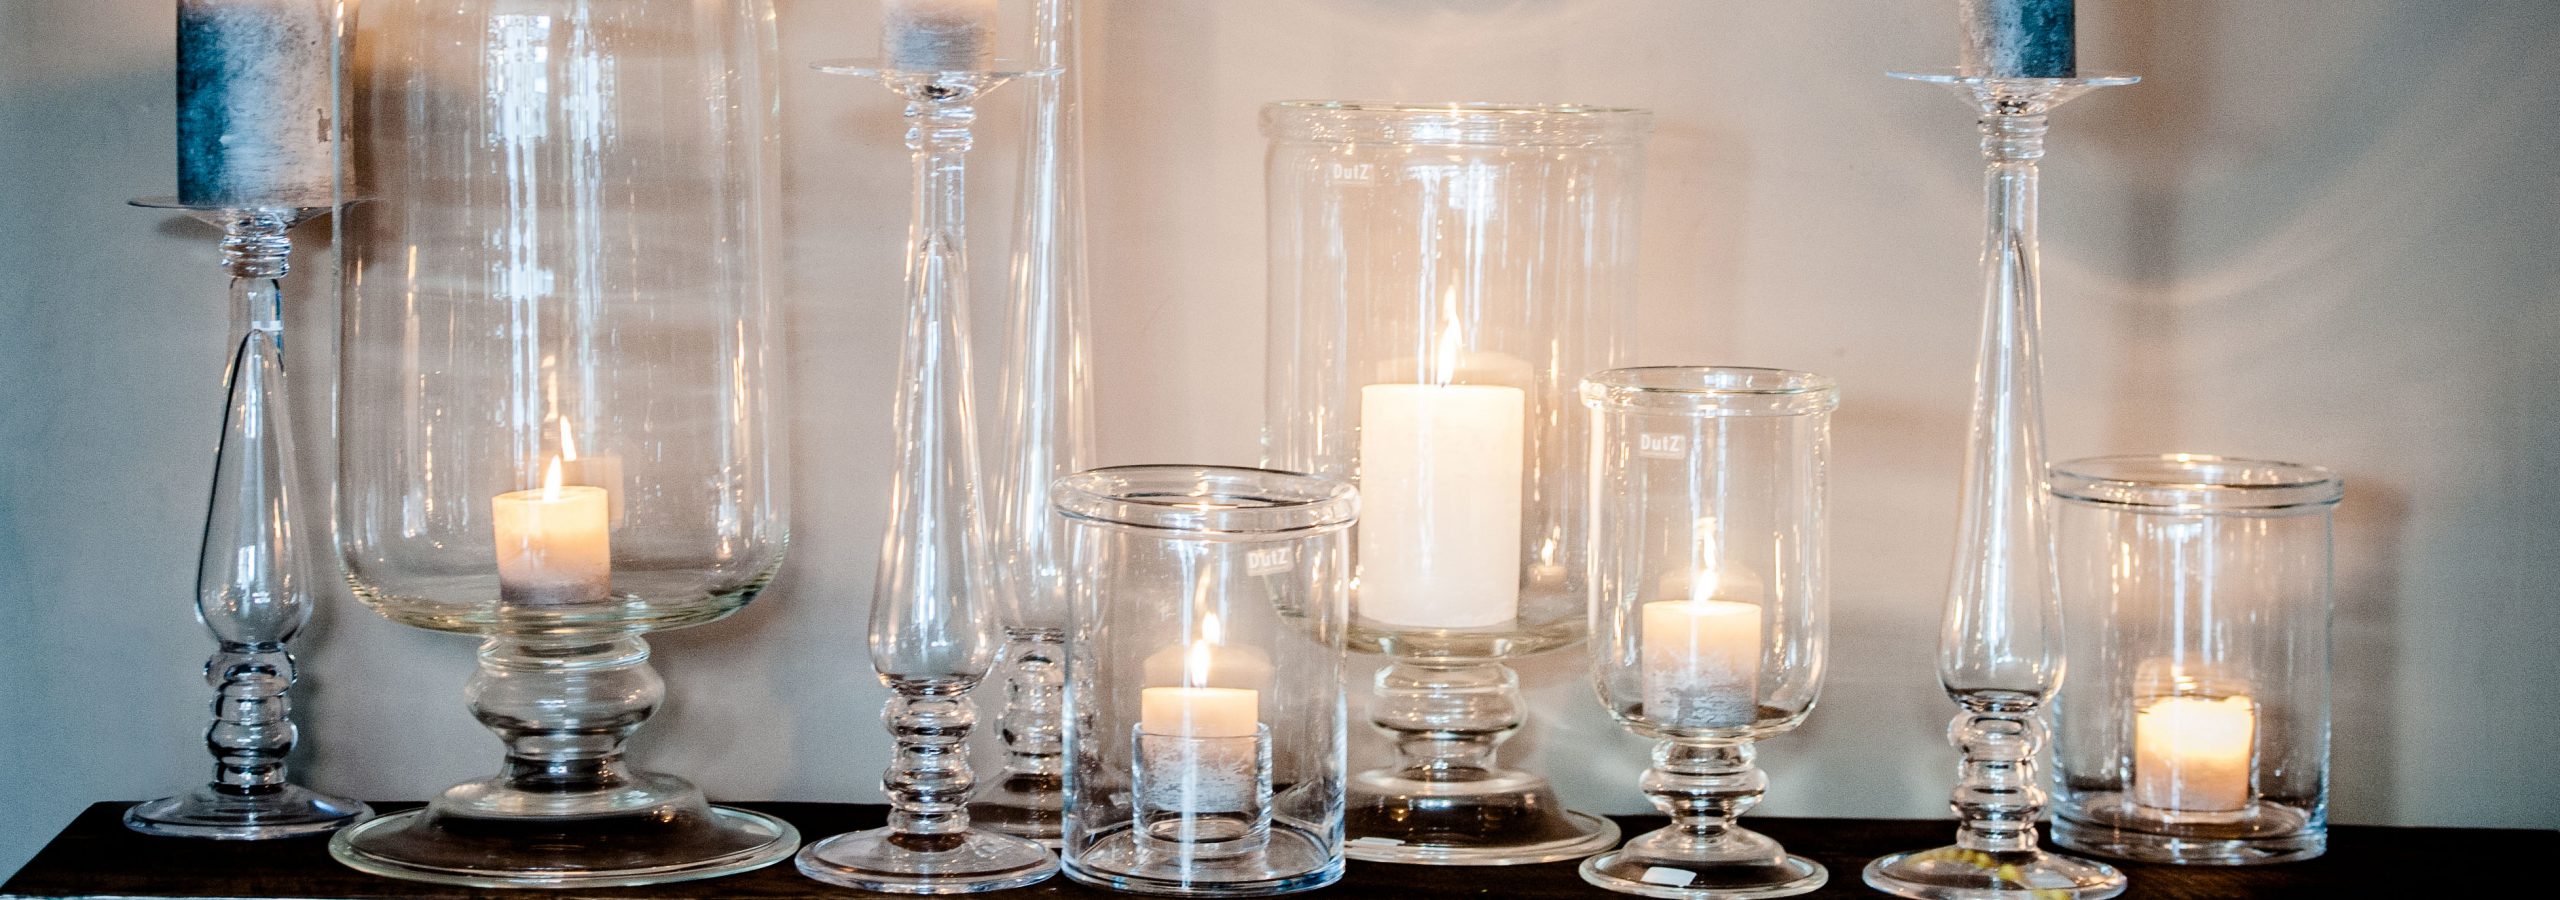 Glass candleholders and hurricanes with burning candles on a side-table